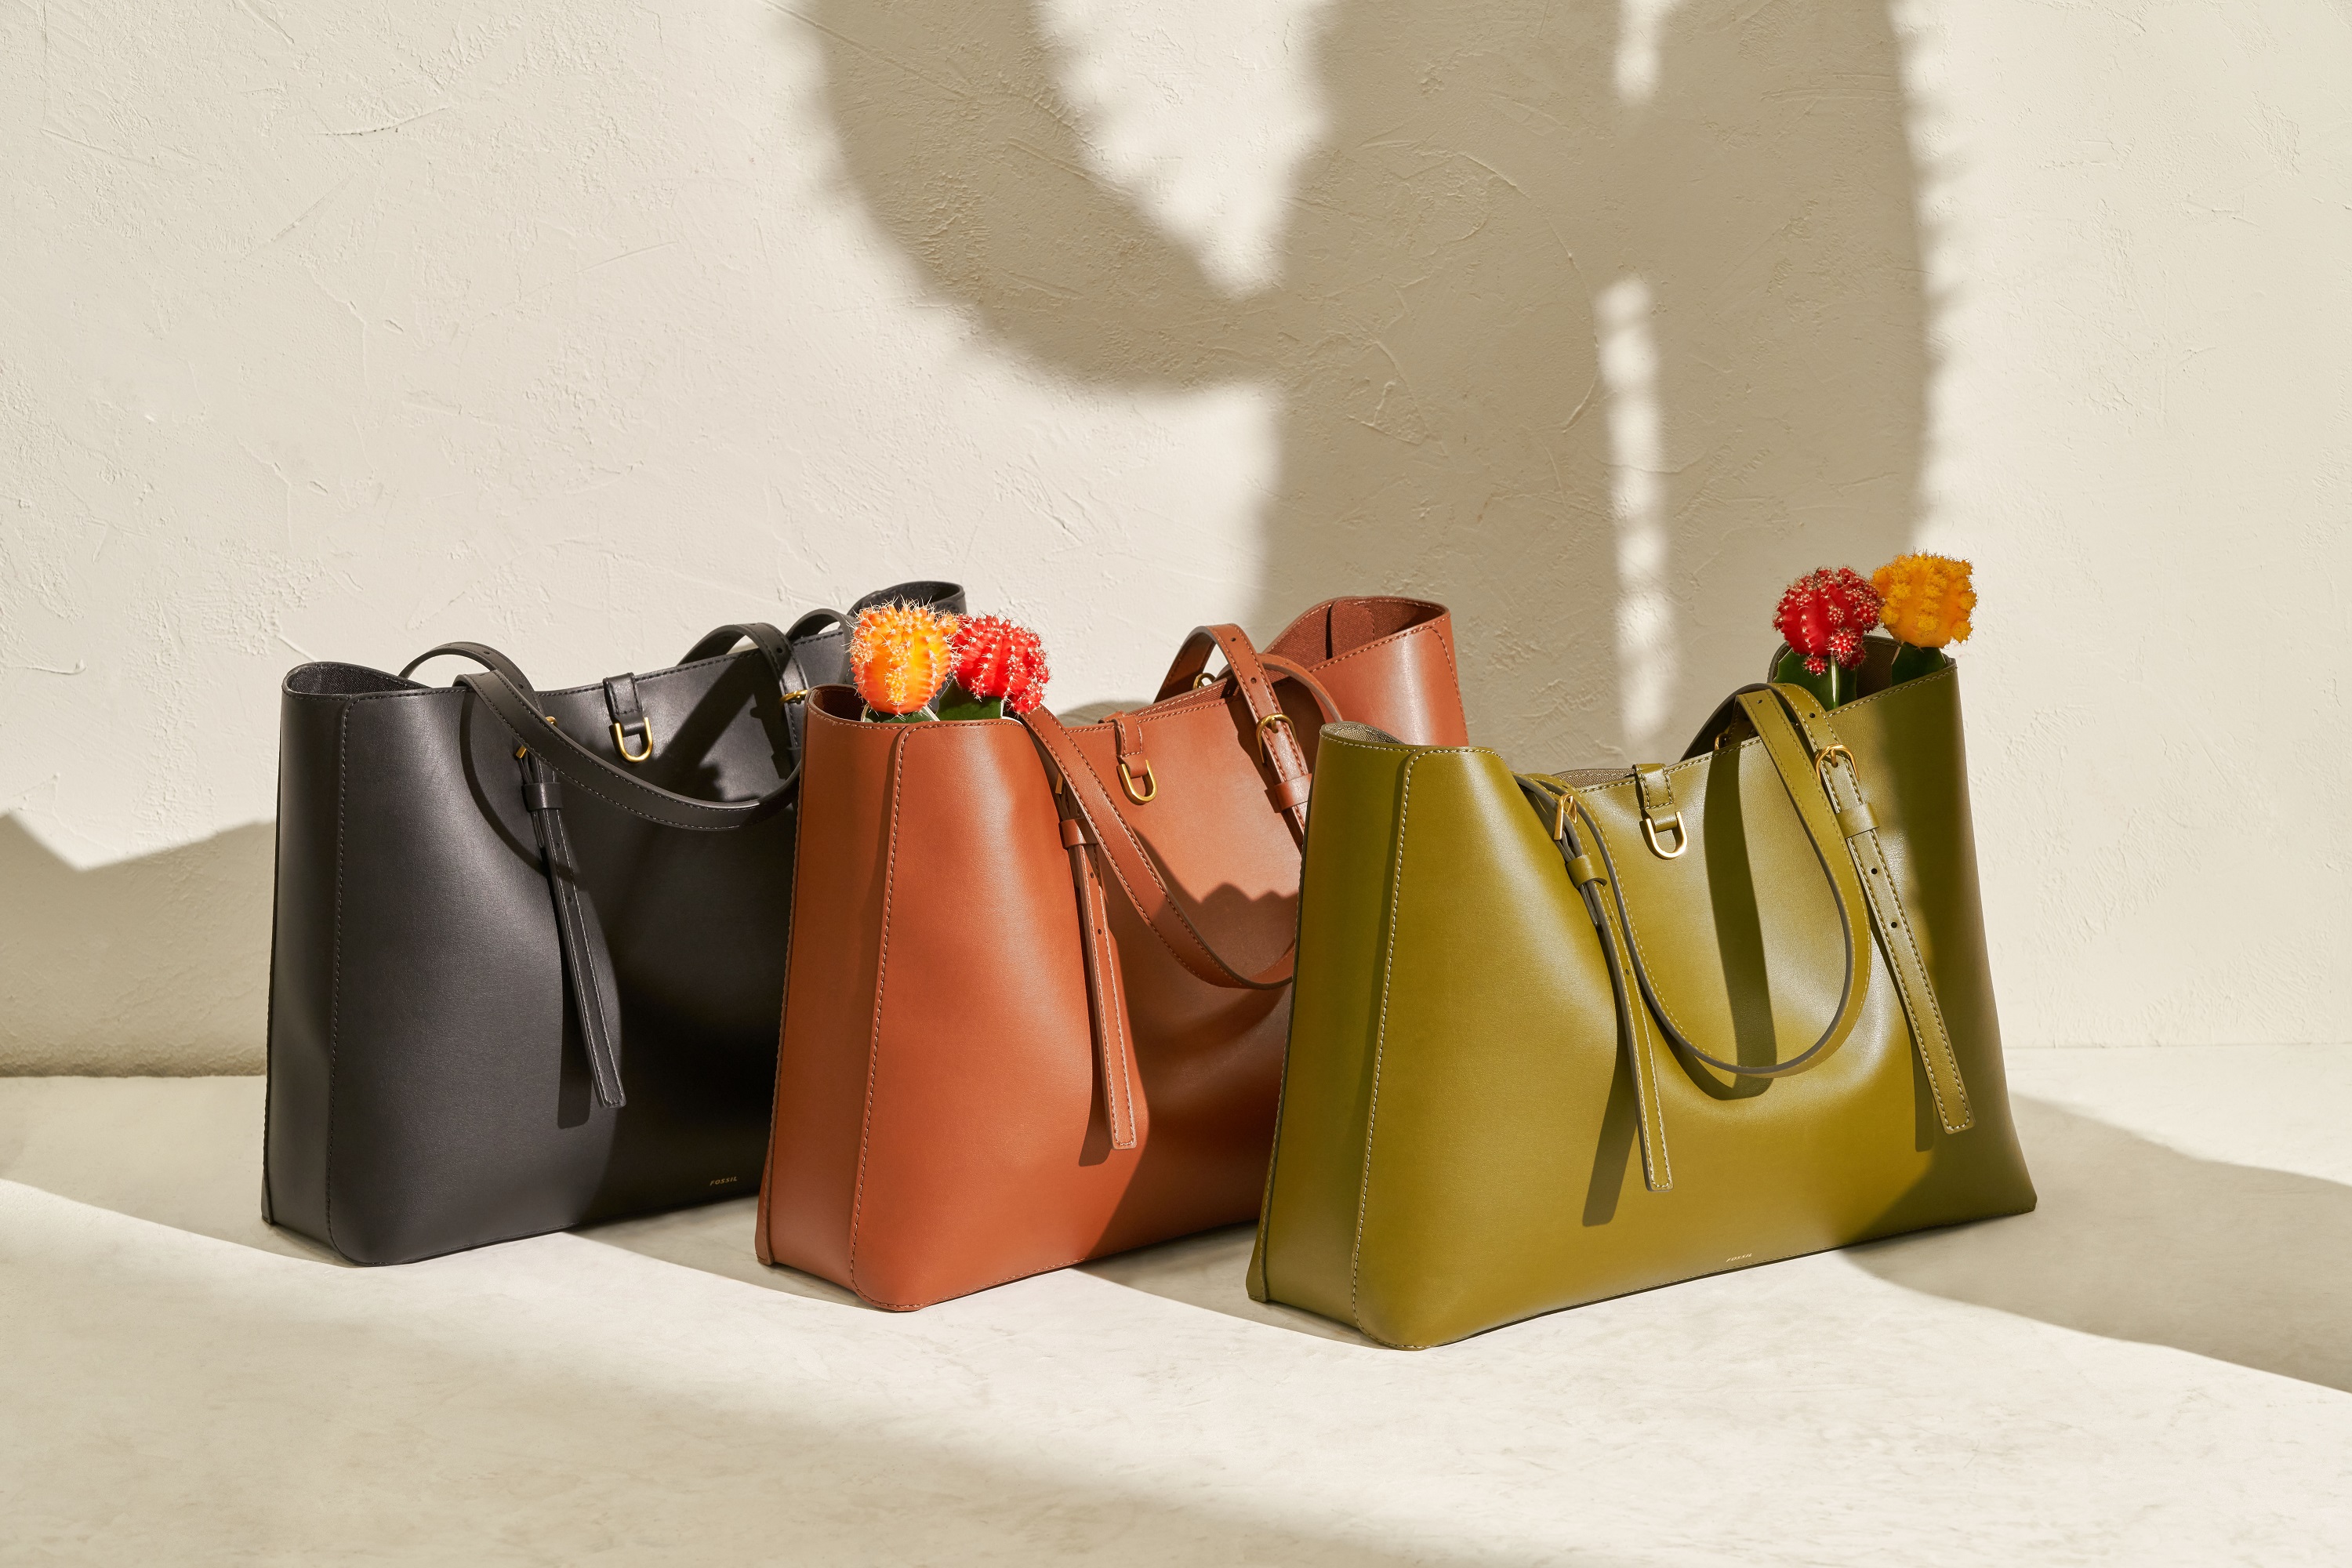 Fossil Launches Pro-Planet Cactus Leather Tote Bags and Limited-Edition Solar Watch in Singapore in Celebration of Earth Month